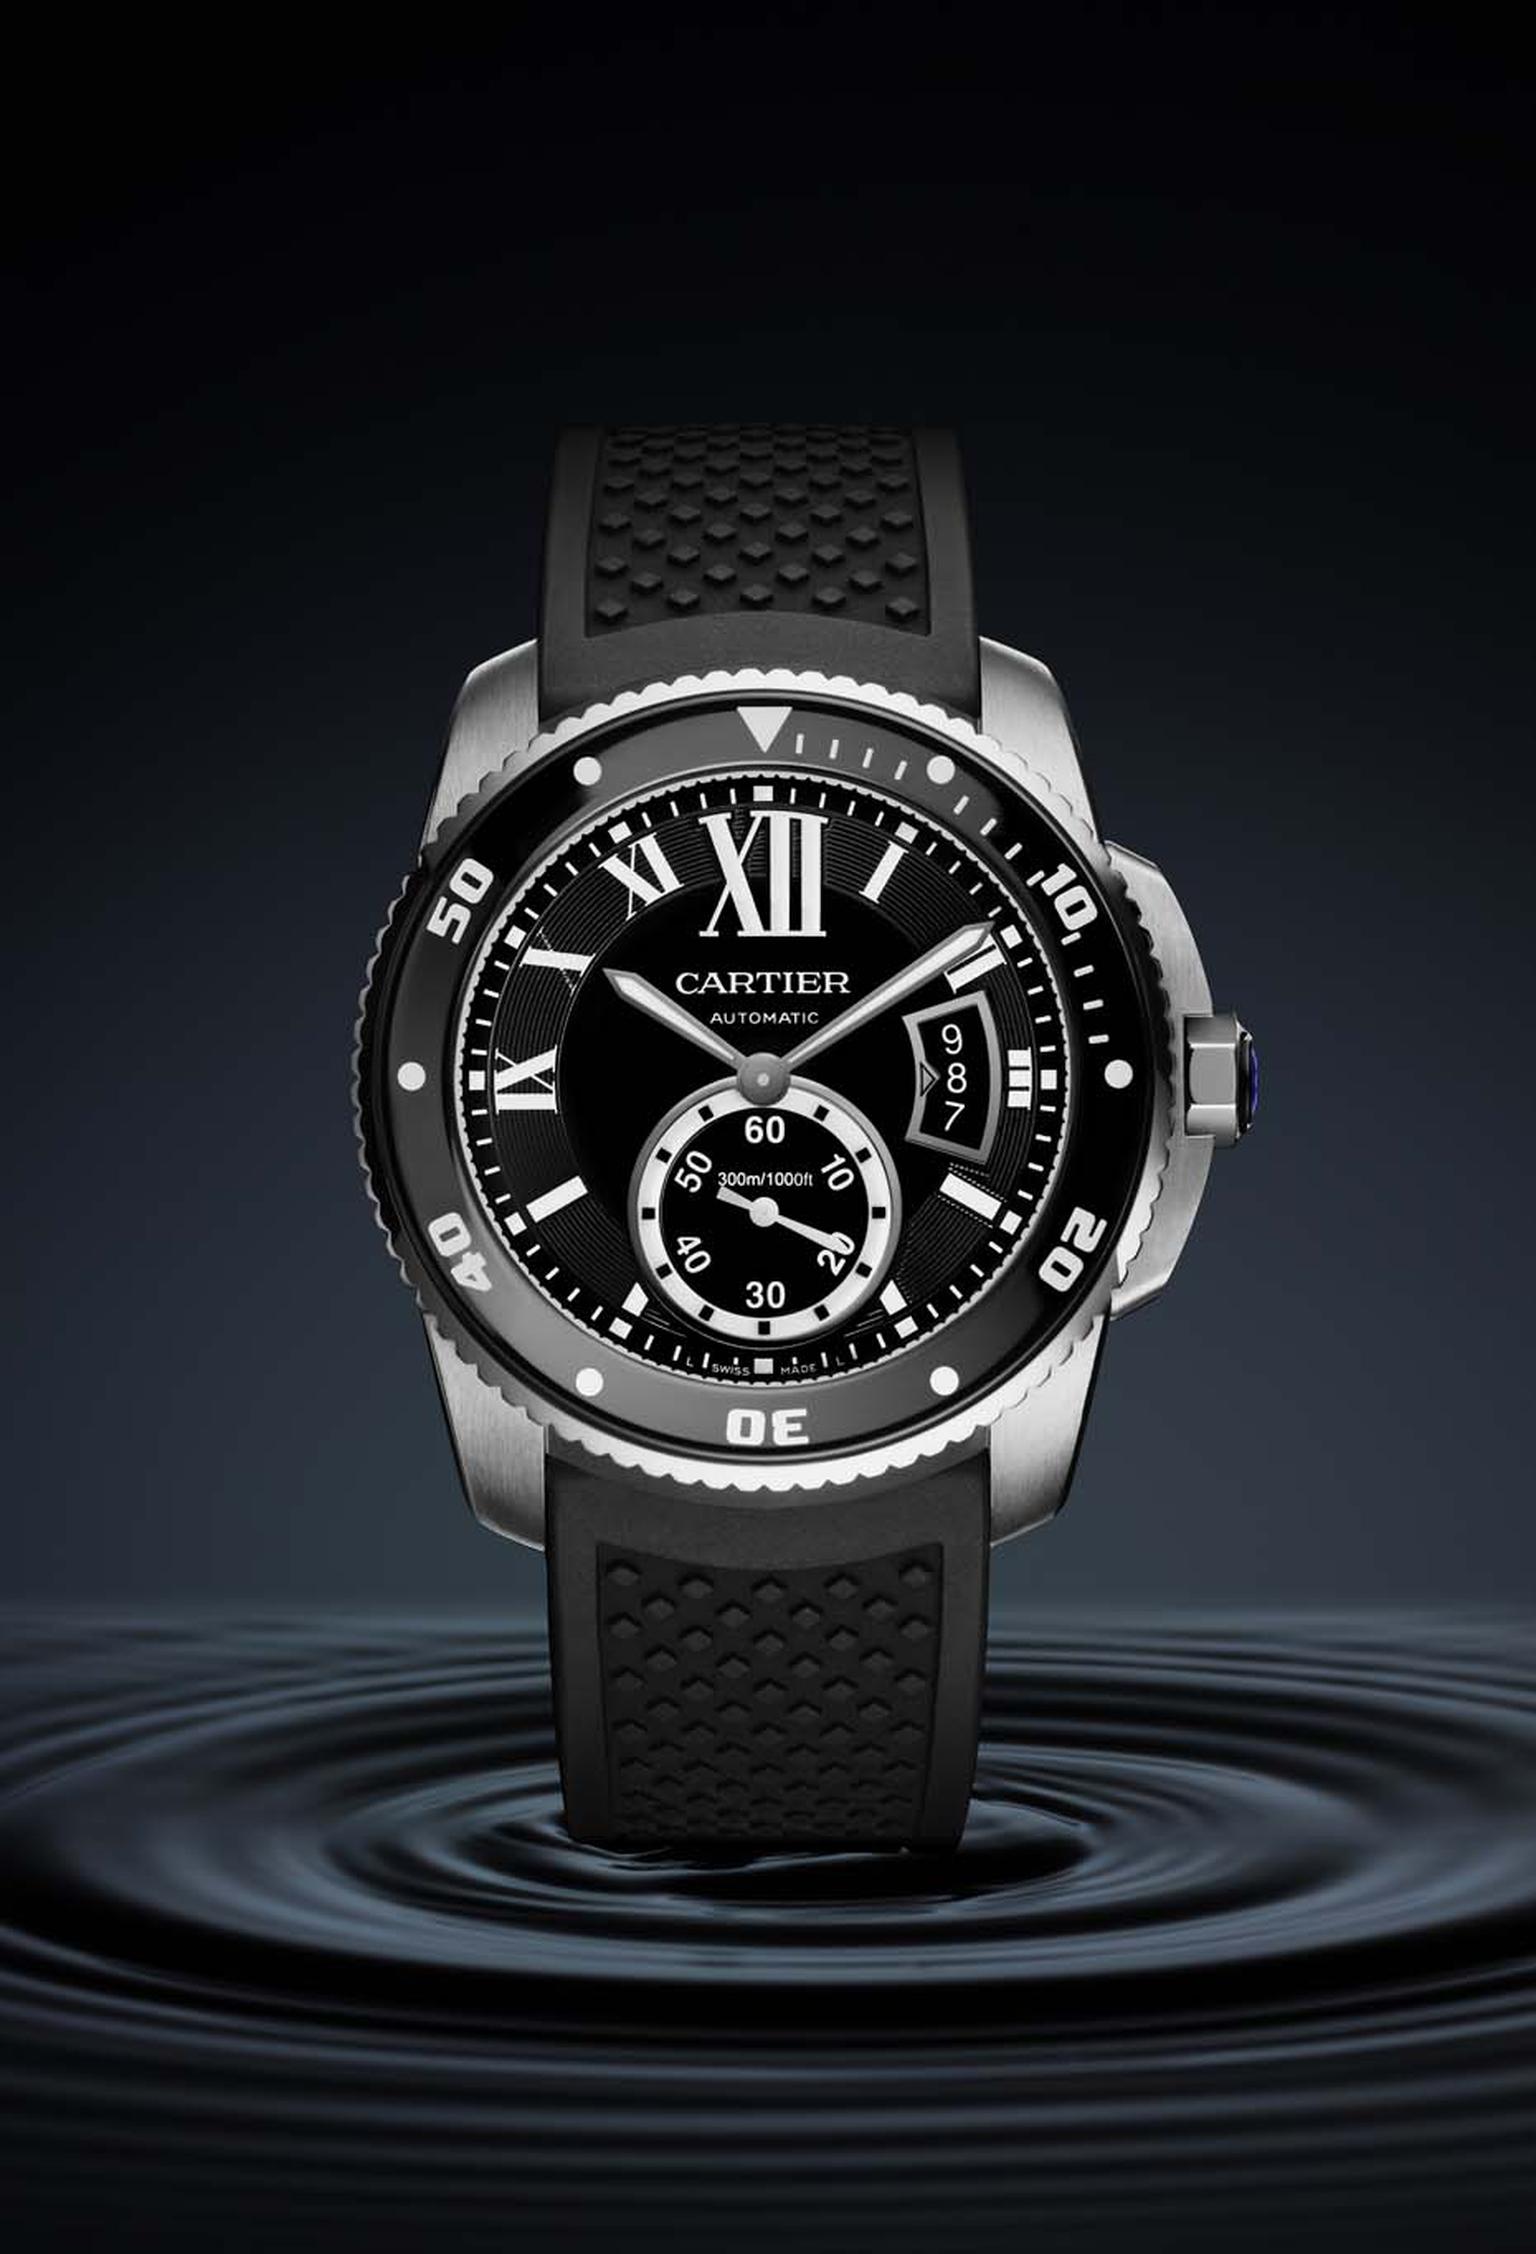 Men's watches: the trends you should know about for 2014